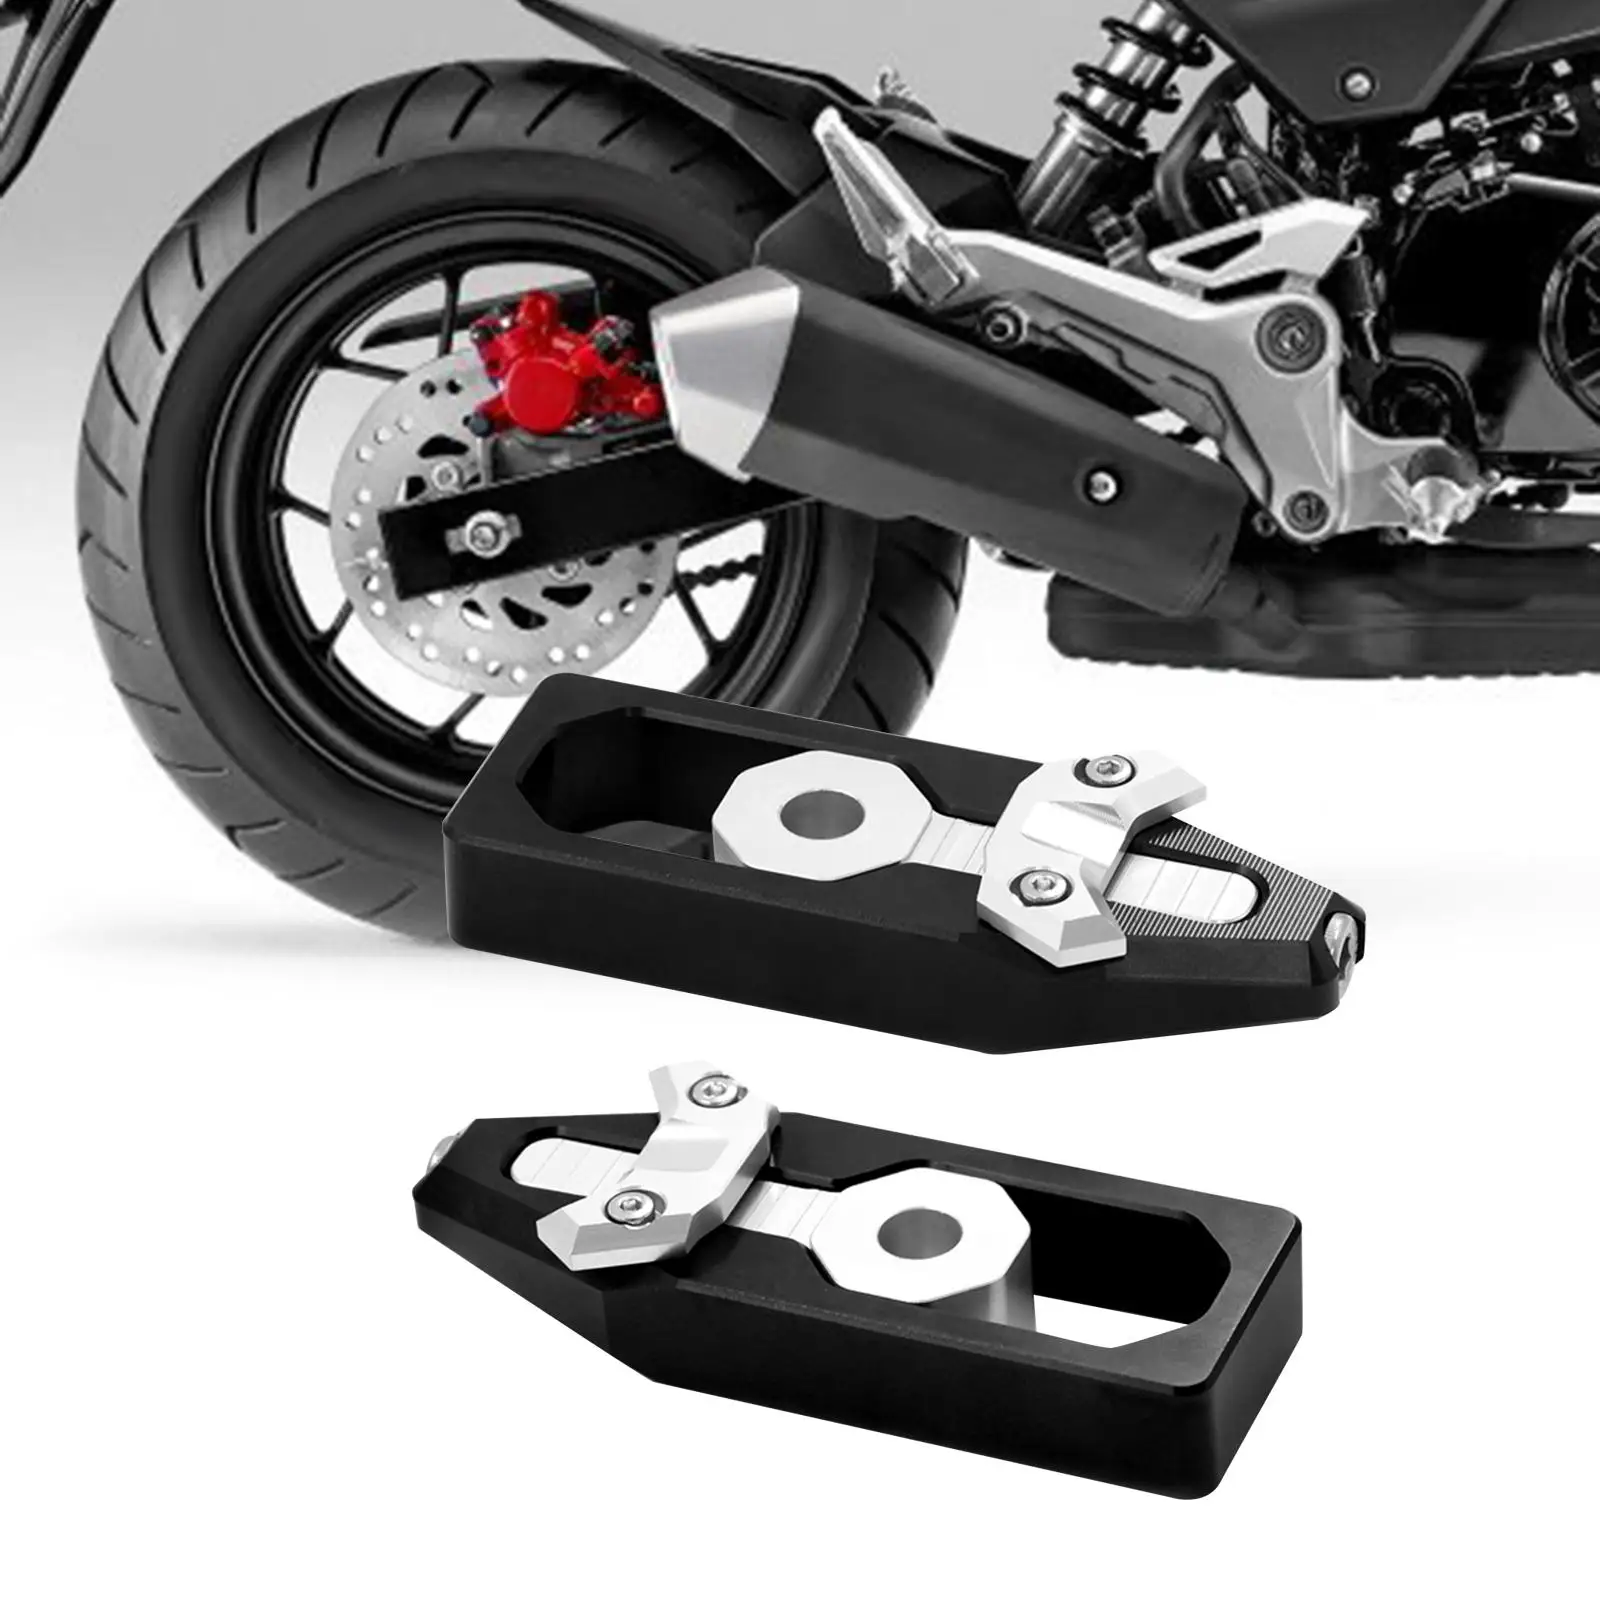 2x Chain Tensioner Simple Installation Professional Aluminum Alloy Motor Chain Adjuster set For honda 2014-2020 Grom